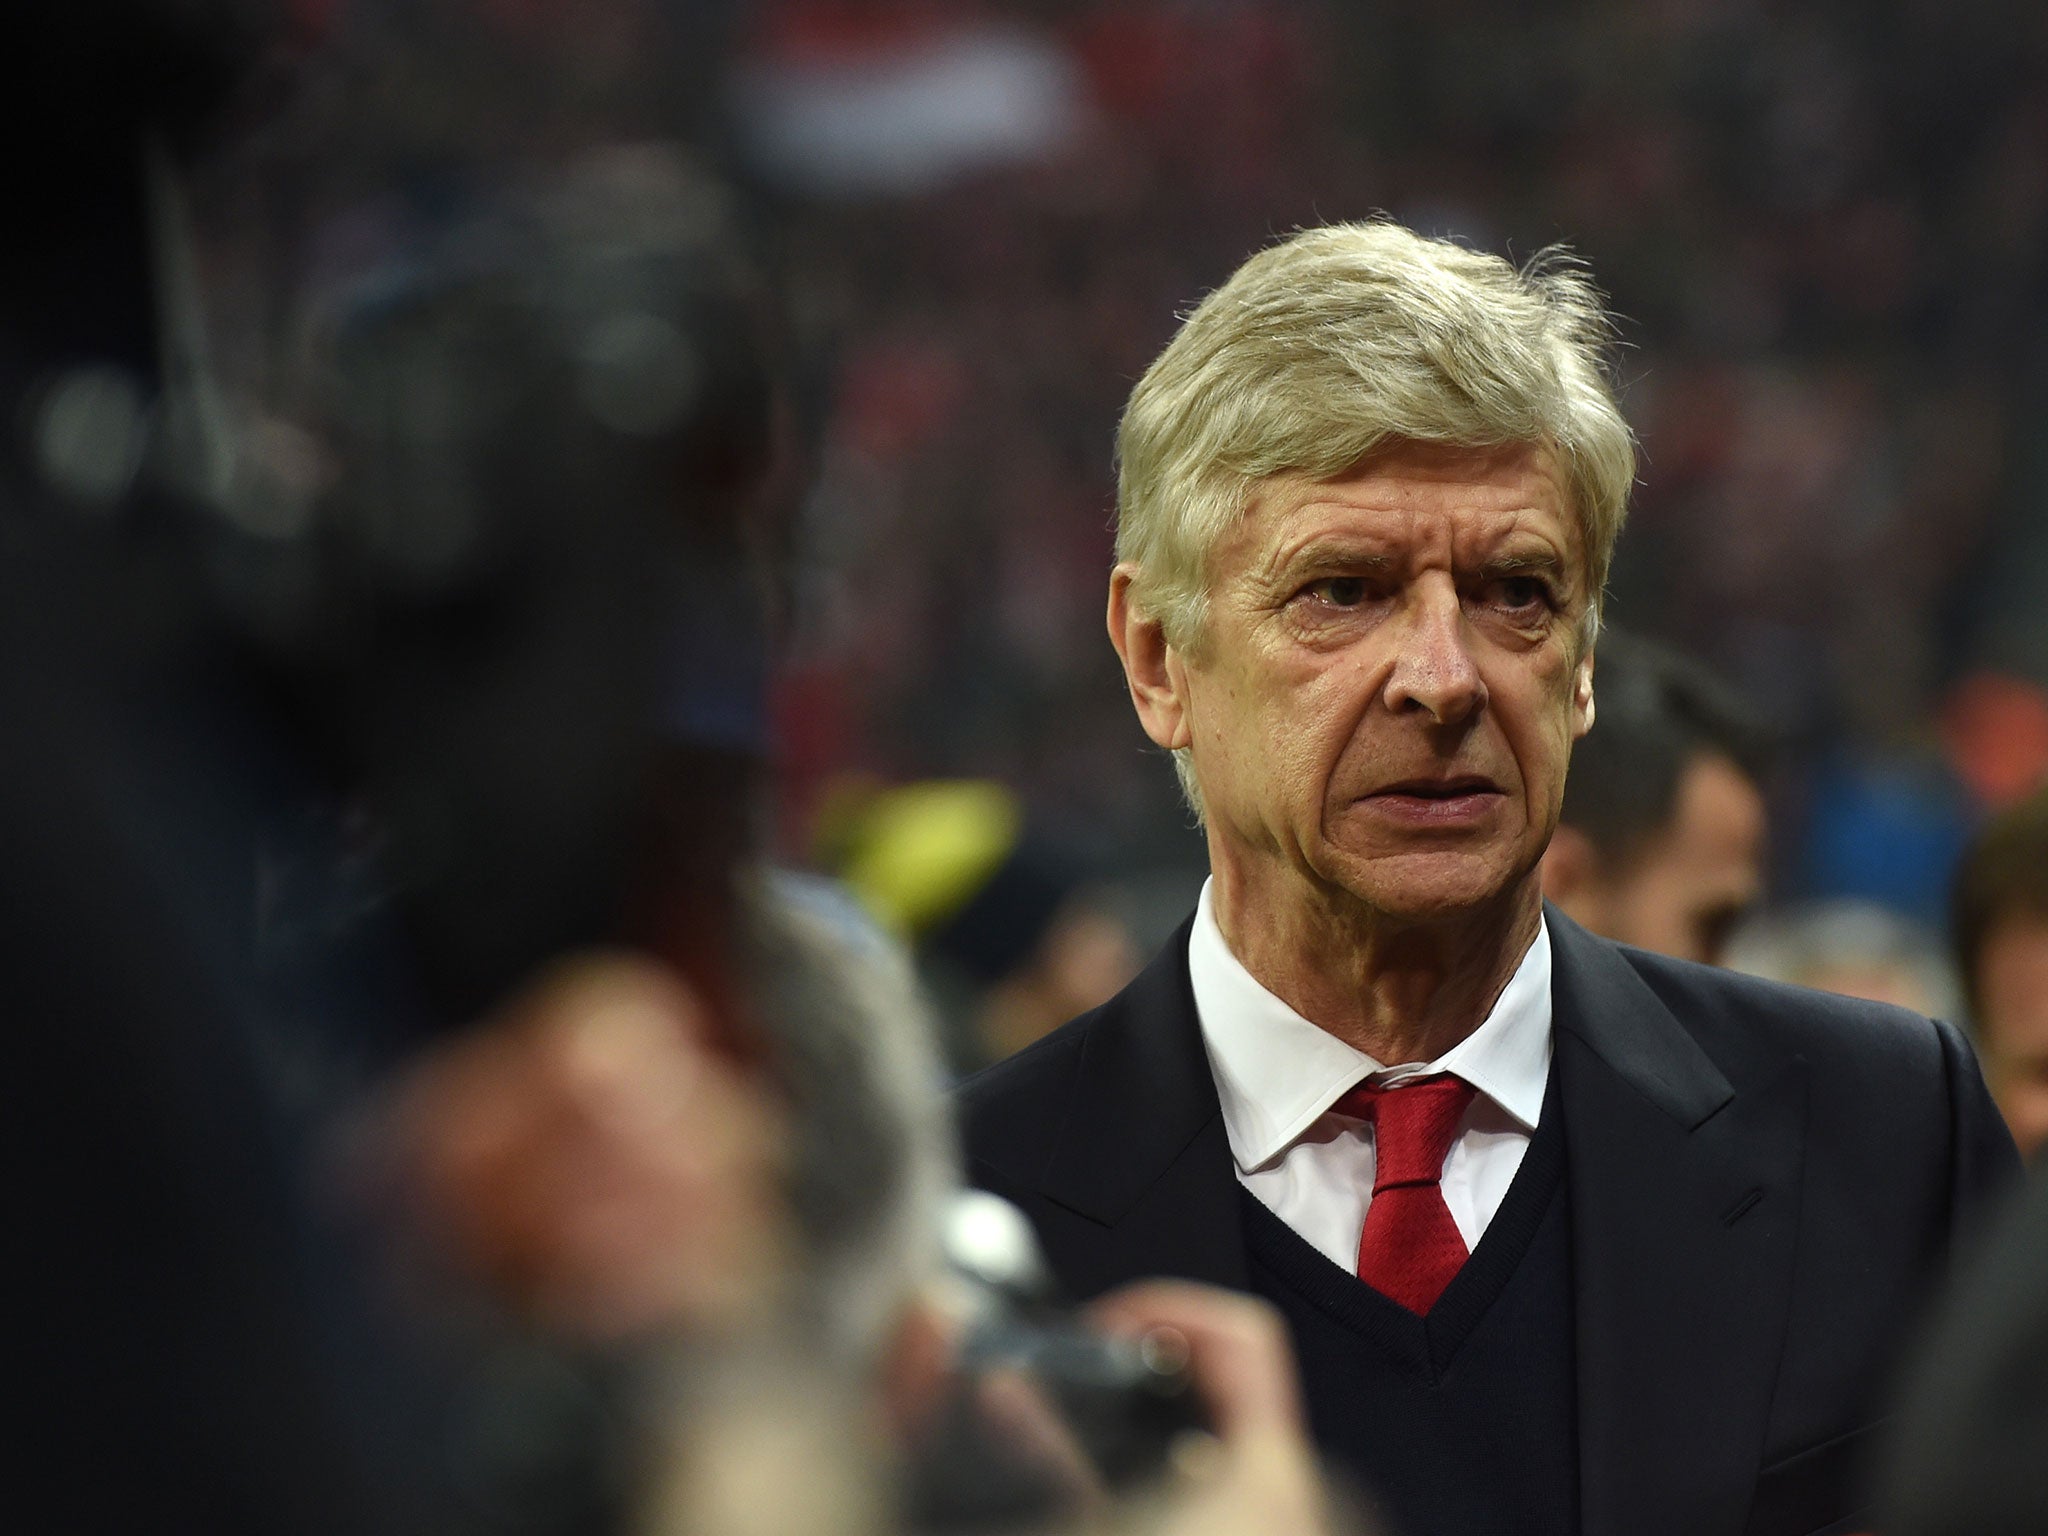 Wenger's future at Arsenal remains unclear